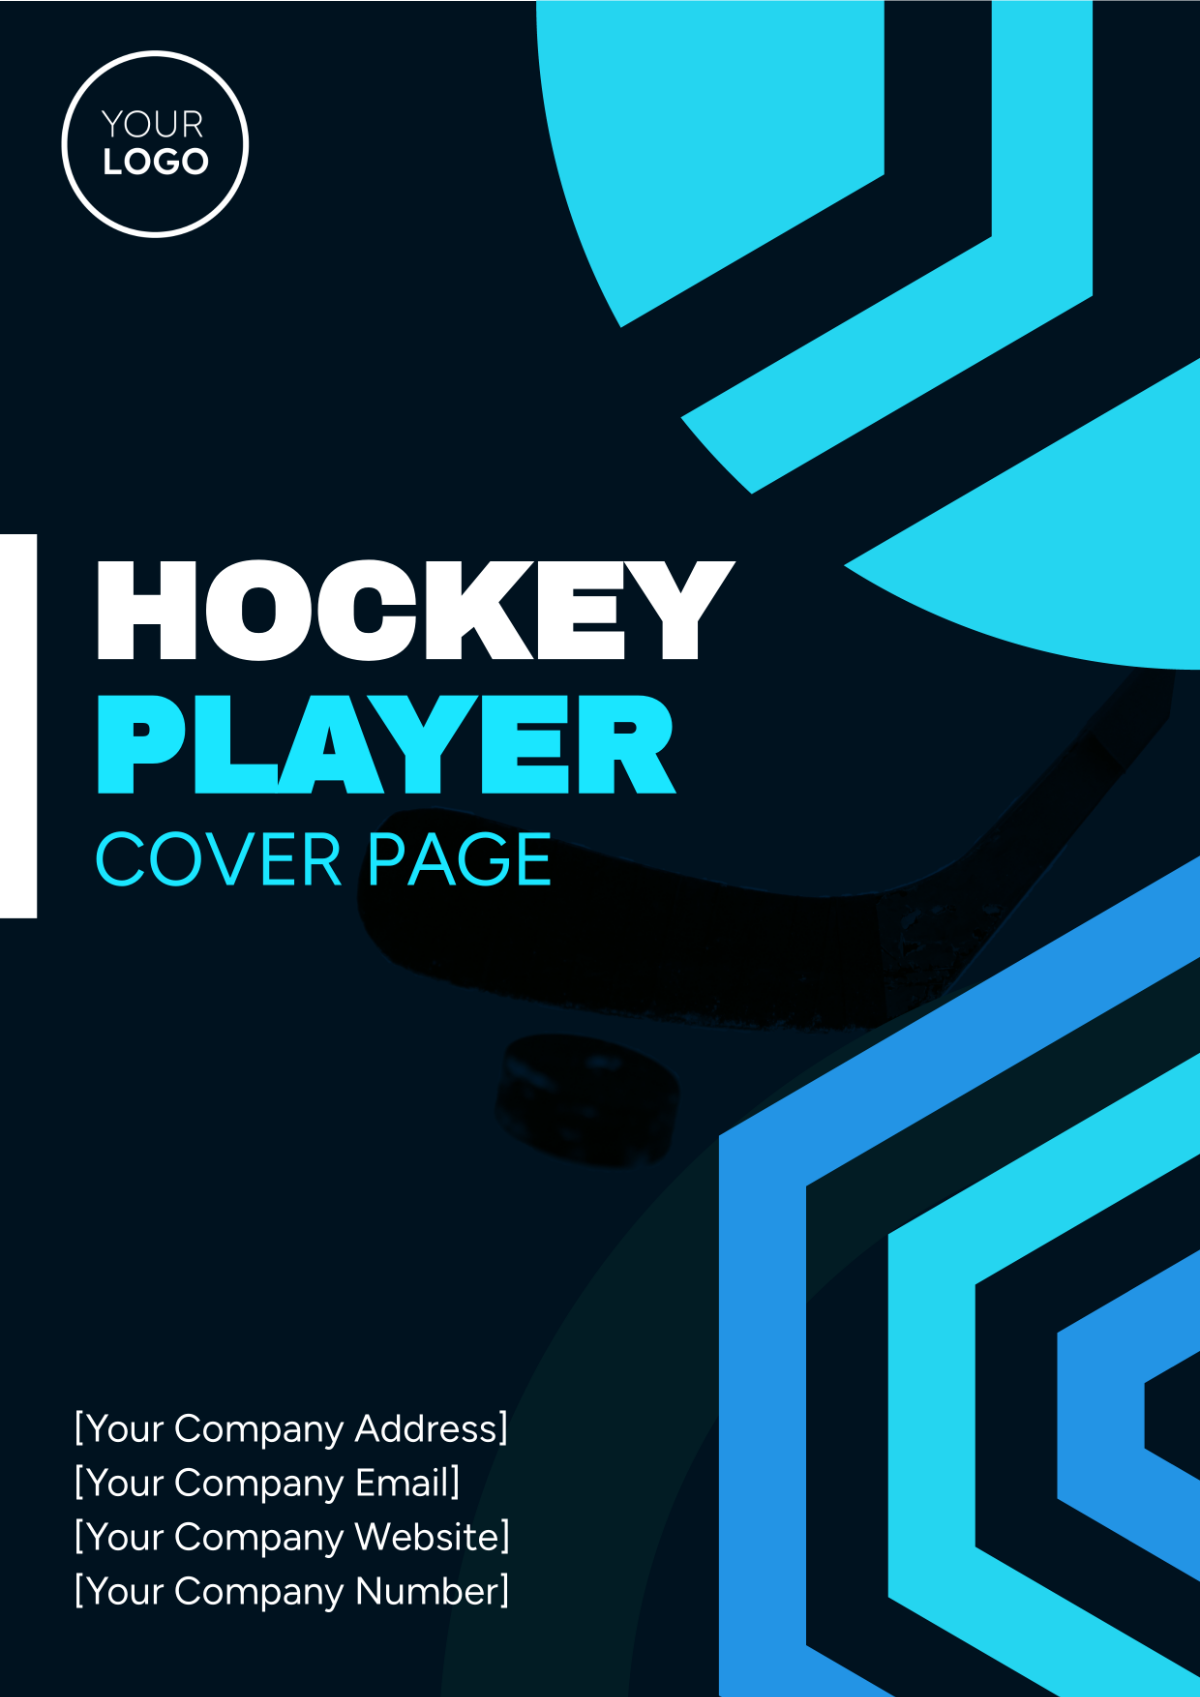 Hockey Player Evaluation Cover Page